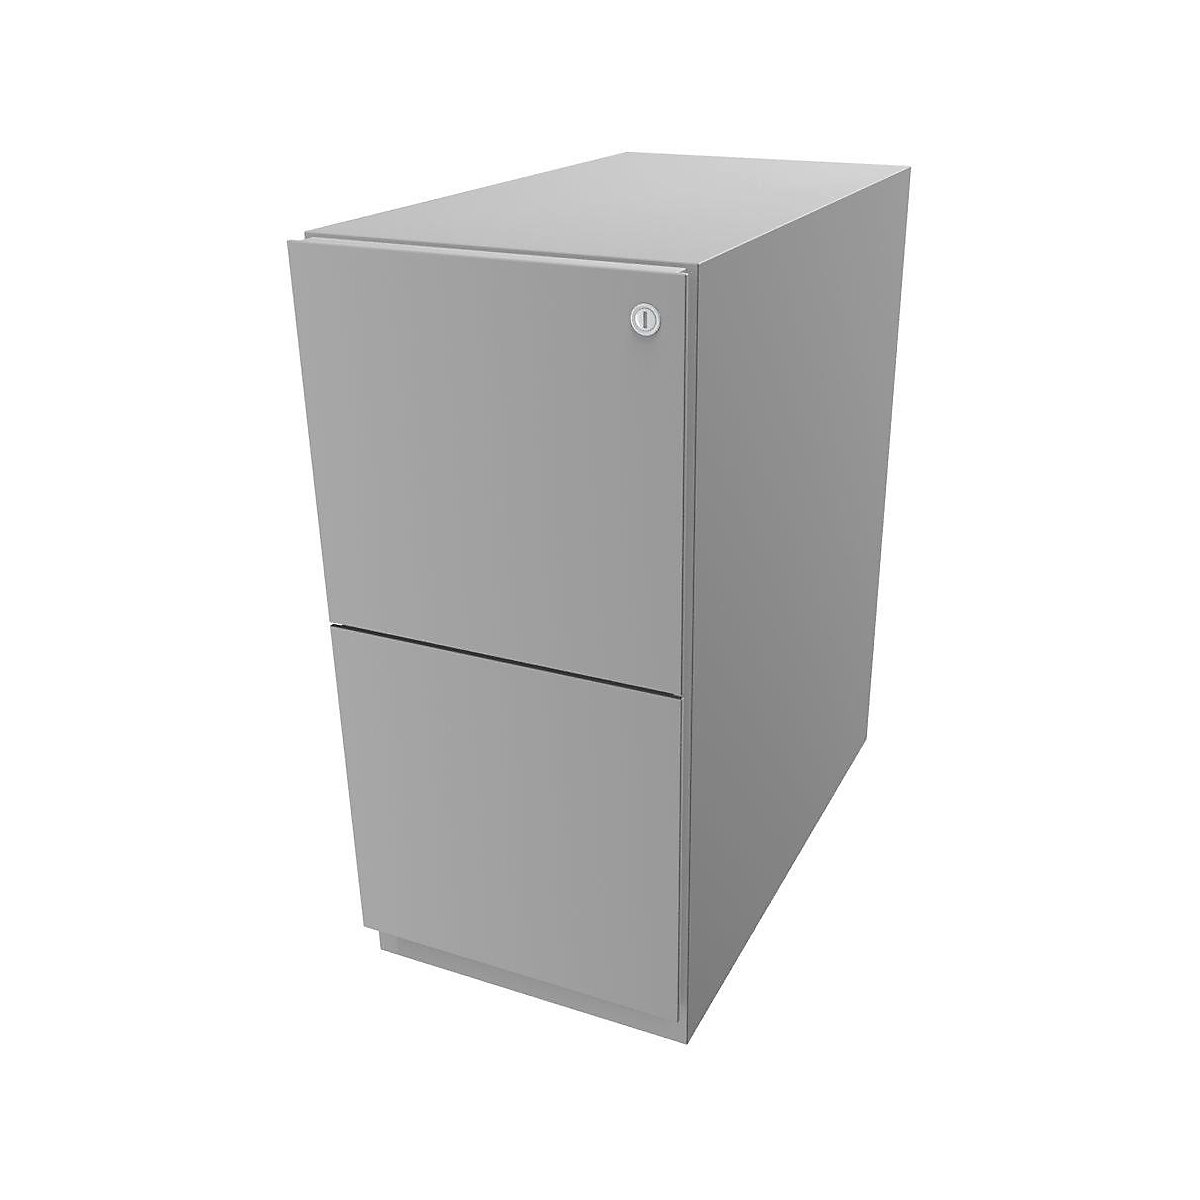 Note™ mobile pedestal, with 2 suspension file drawers – BISLEY, HxW 645 x 300 mm, light grey-15